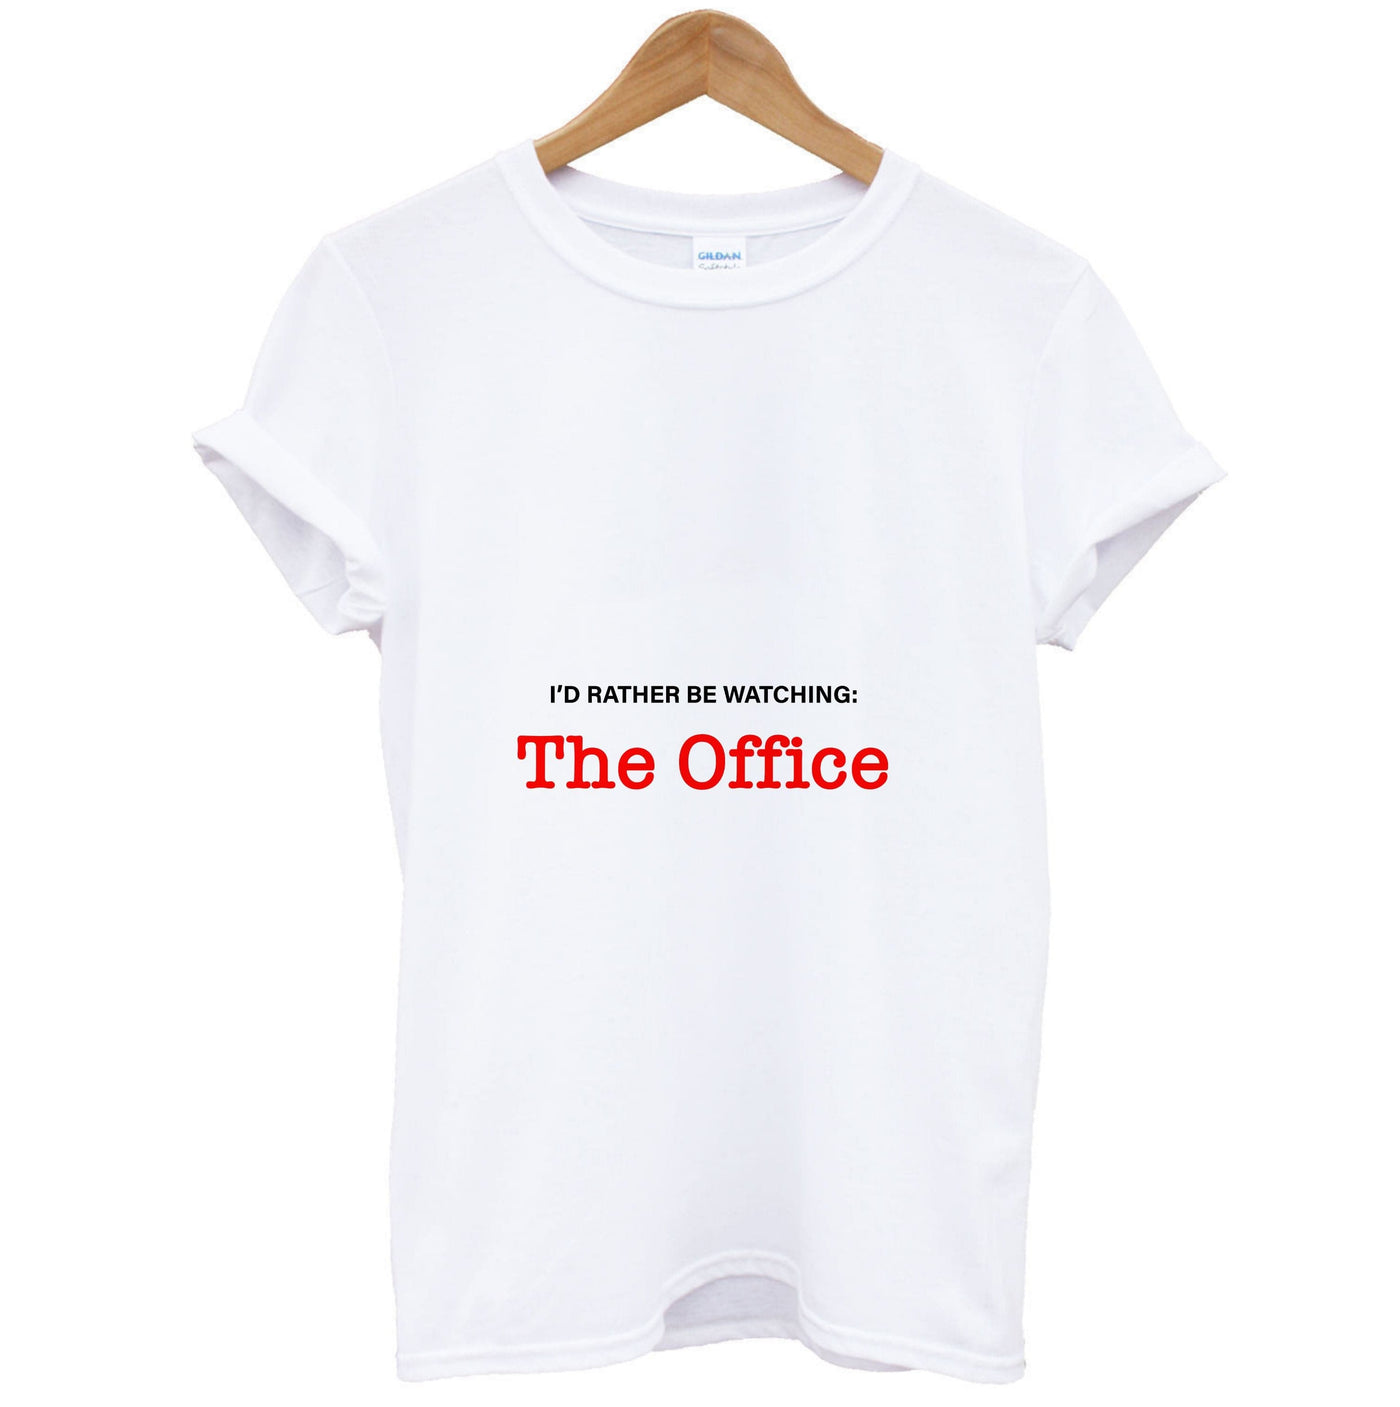 I'd Rather Be Watching The Office - The Office T-Shirt